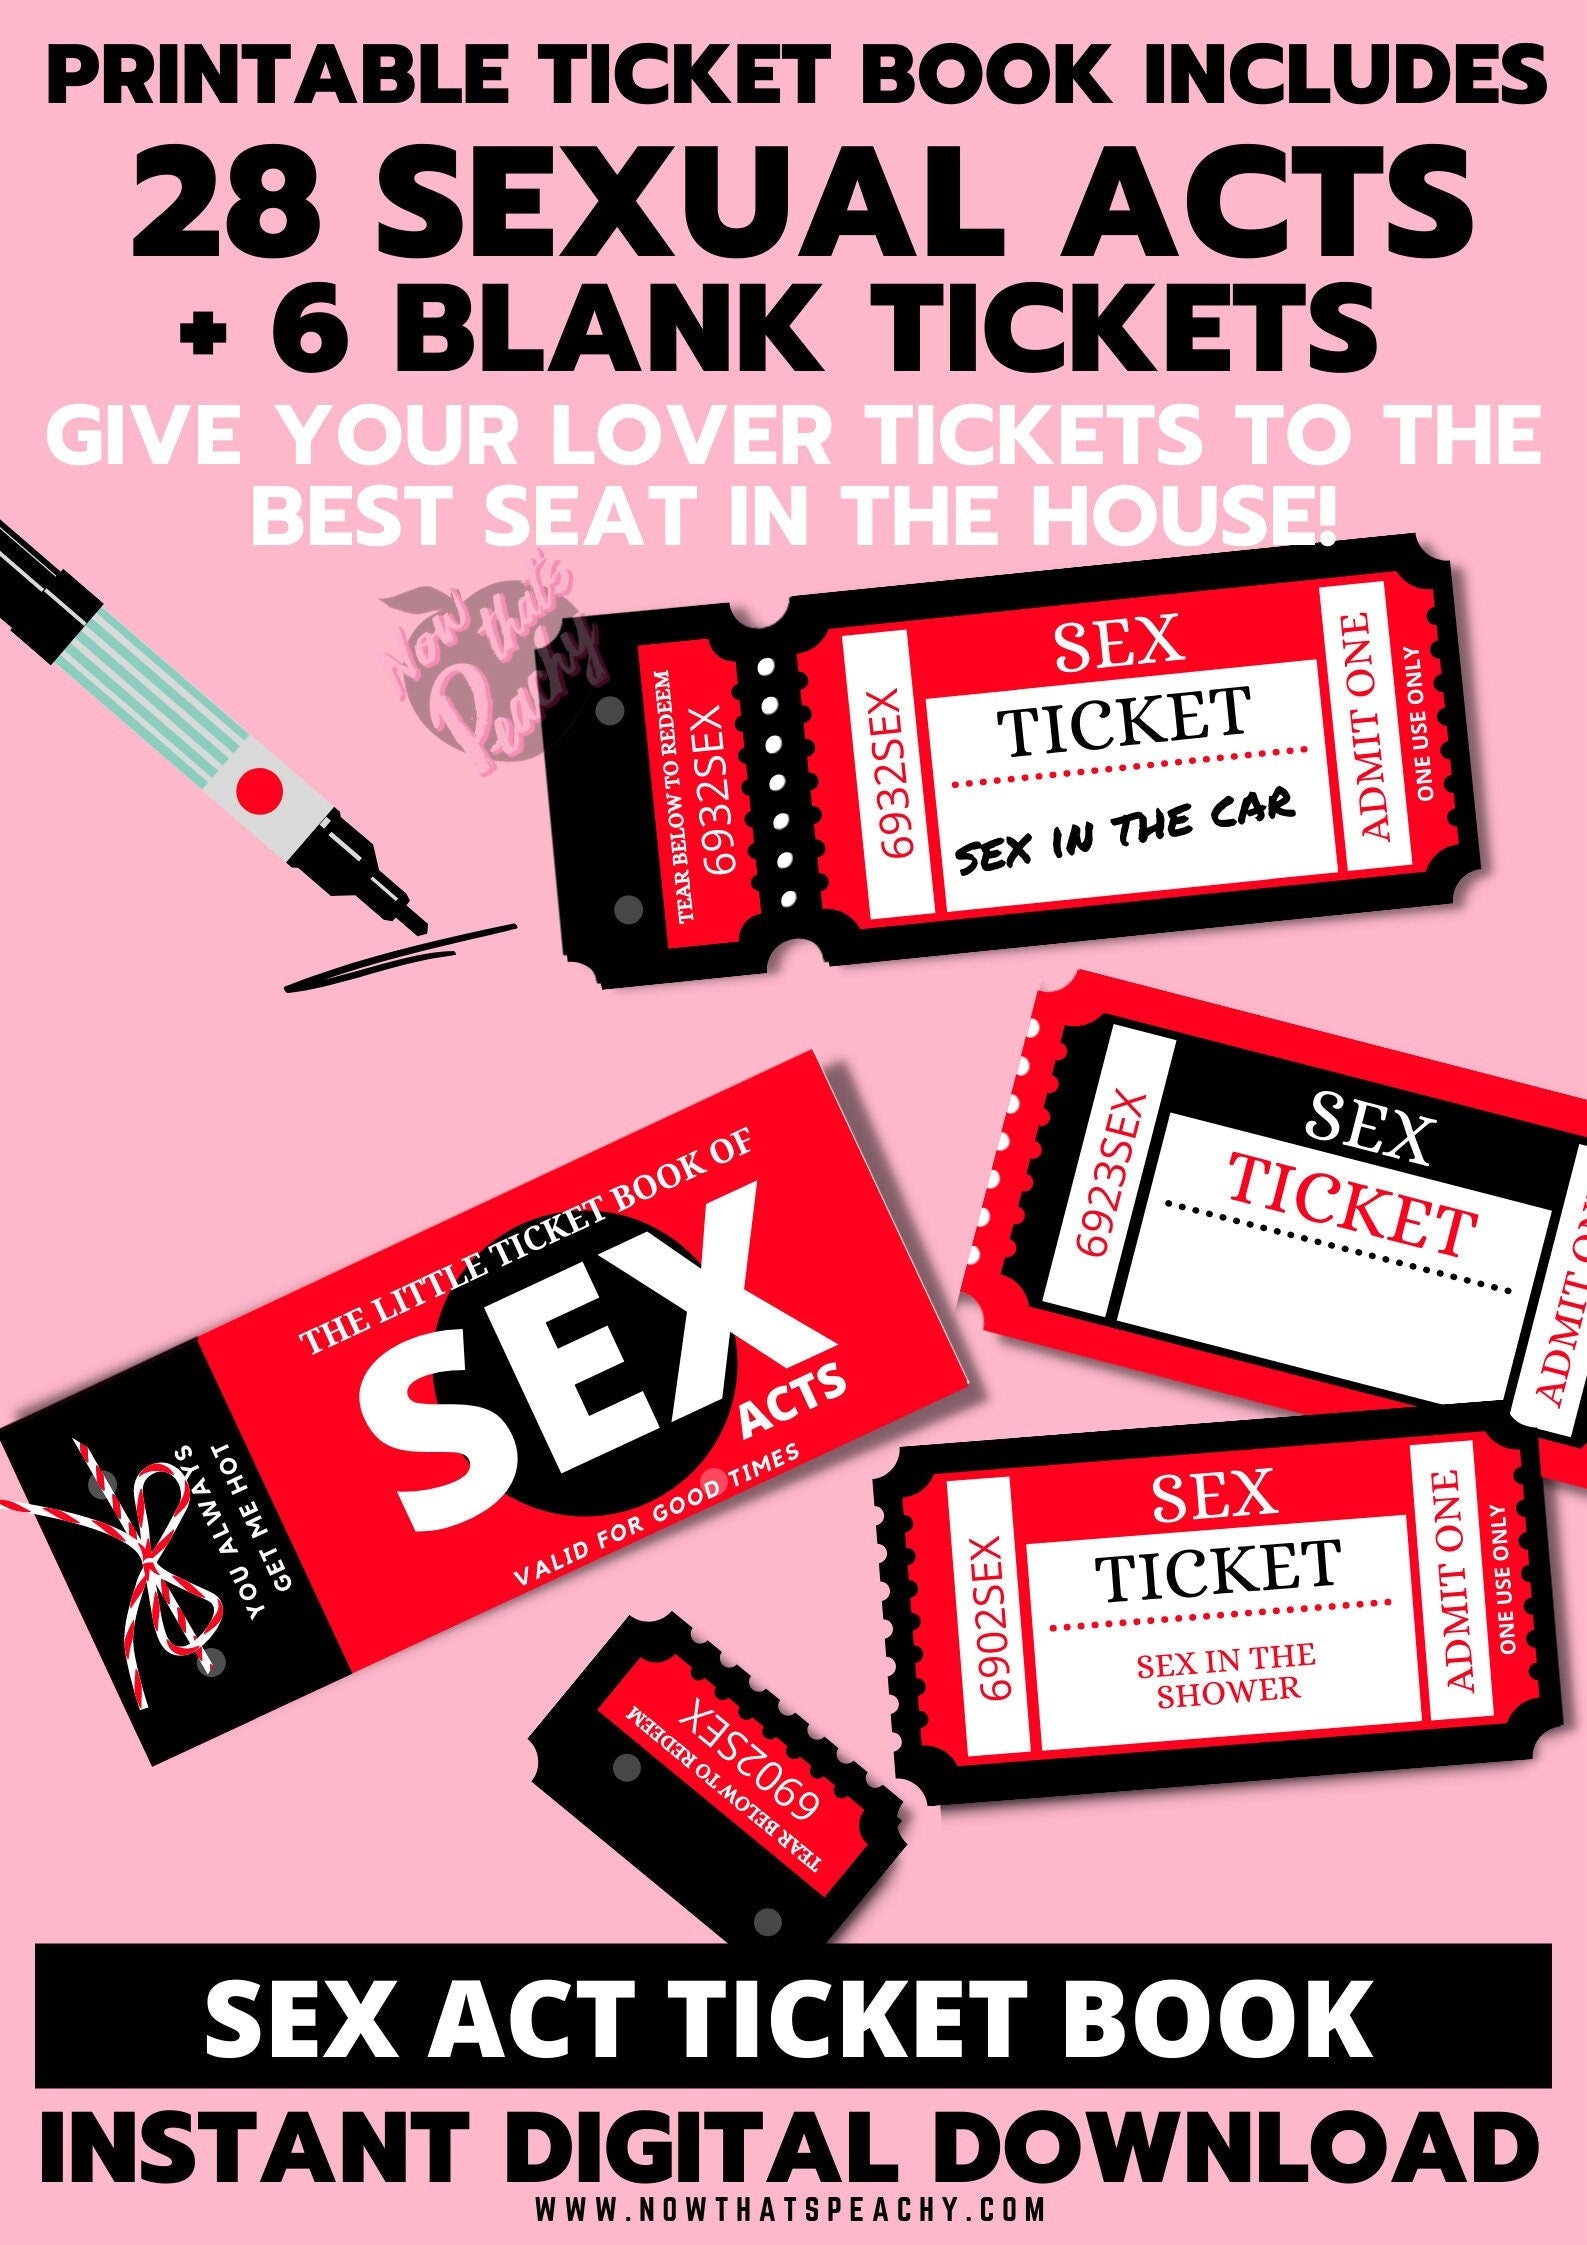 SEX Acts TICKET Voucher Book Printable Download Valentines Day Anniver image